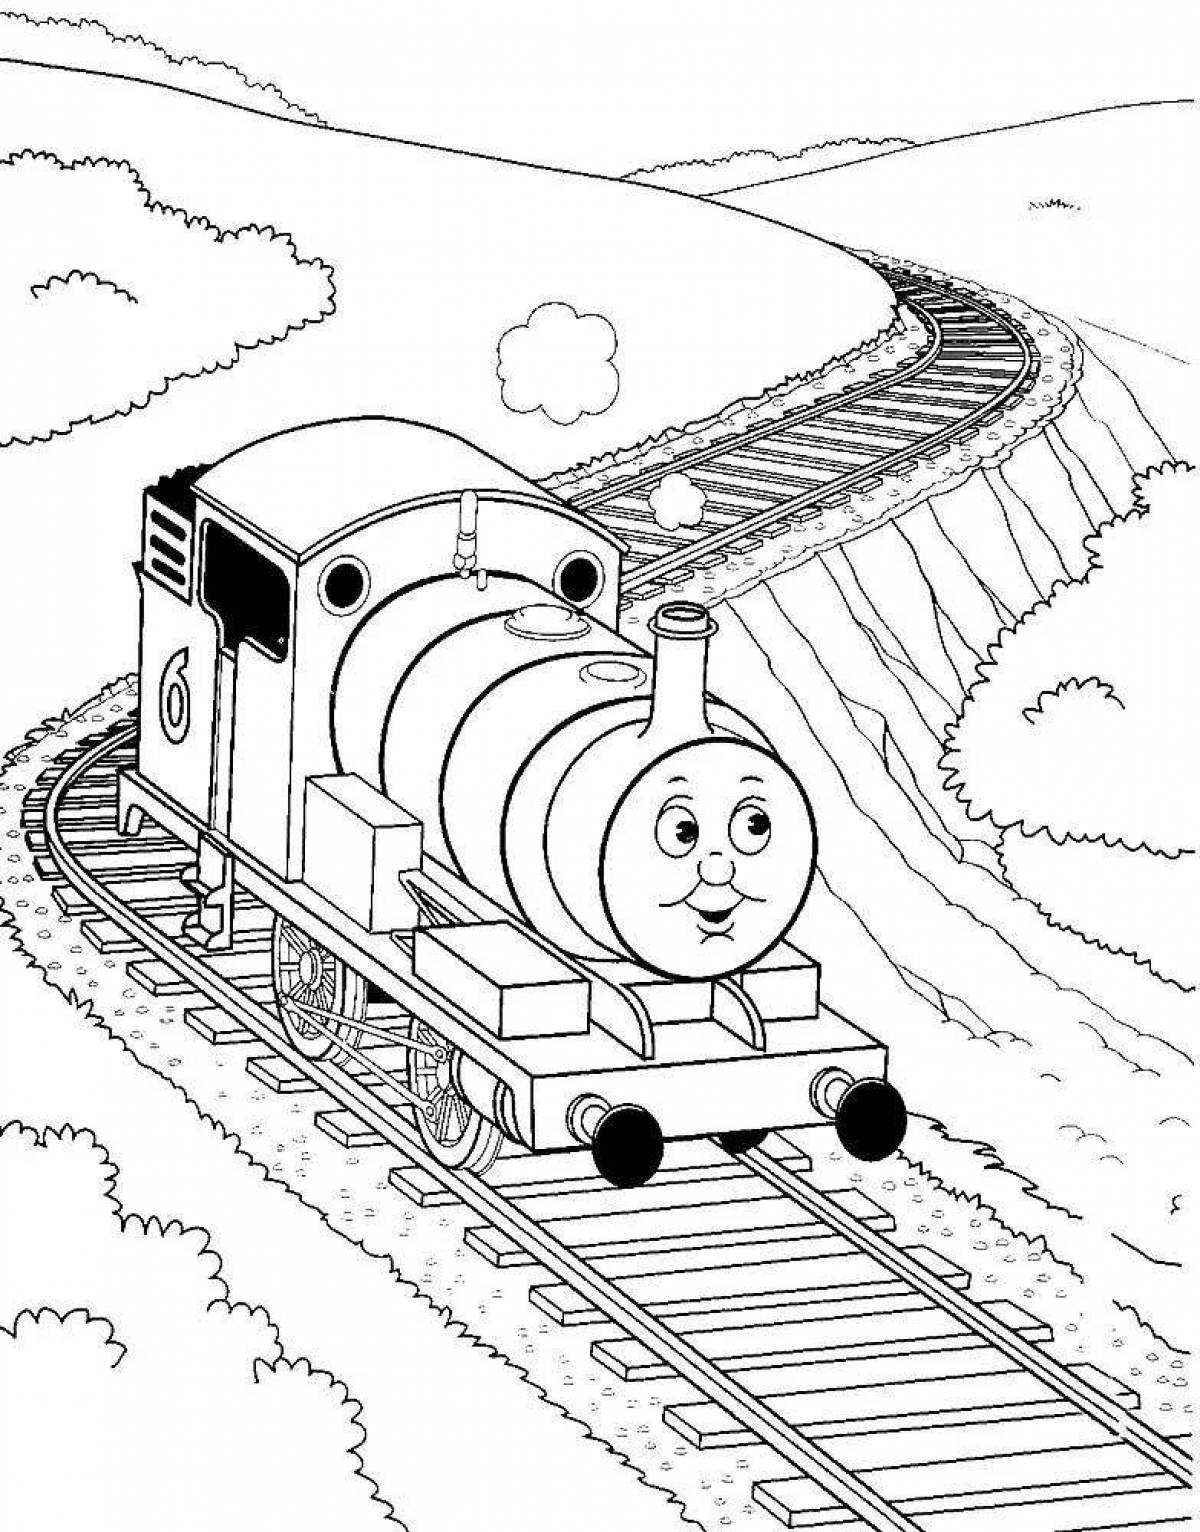 Thomas' lovely train coloring book